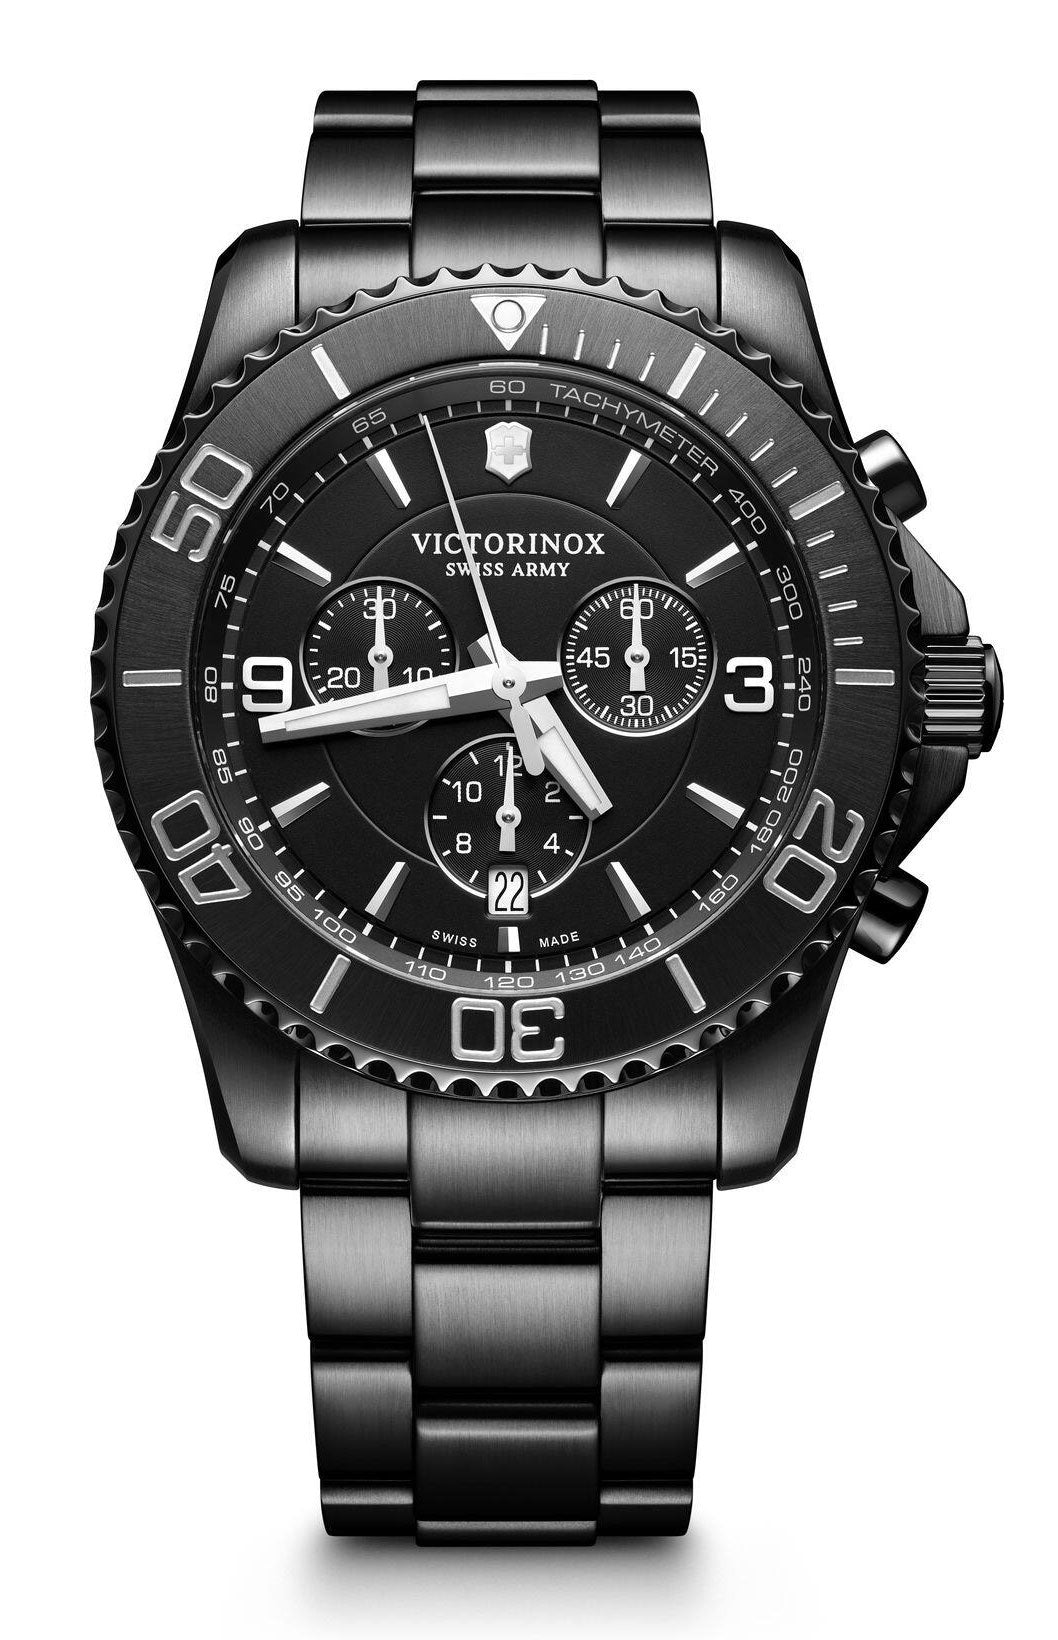 update alt-text with template Watches - Mens-Victorinox Swiss Army-241797-12-hour display, 40 - 45 mm, black, black PVD band, black PVD case, chronograph, date, Maverick, mens, menswatches, new arrivals, round, rpSKU_241695, rpSKU_241798, rpSKU_241810, rpSKU_241818, rpSKU_241853, seconds sub-dial, swiss quartz, tachymeter, uni-directional rotating bezel, Victorinox Swiss Army, watches-Watches & Beyond